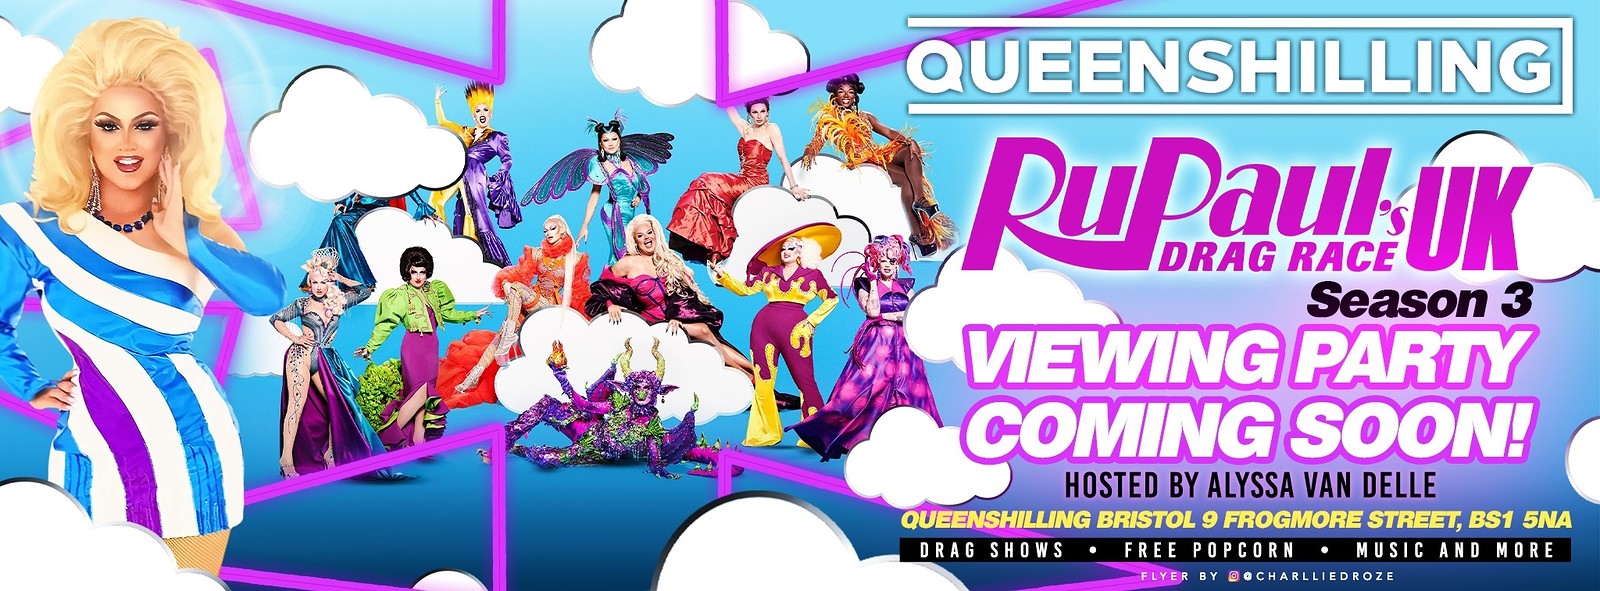 Rupauls drag race UK viewing party Episode 4 at Queenshilling